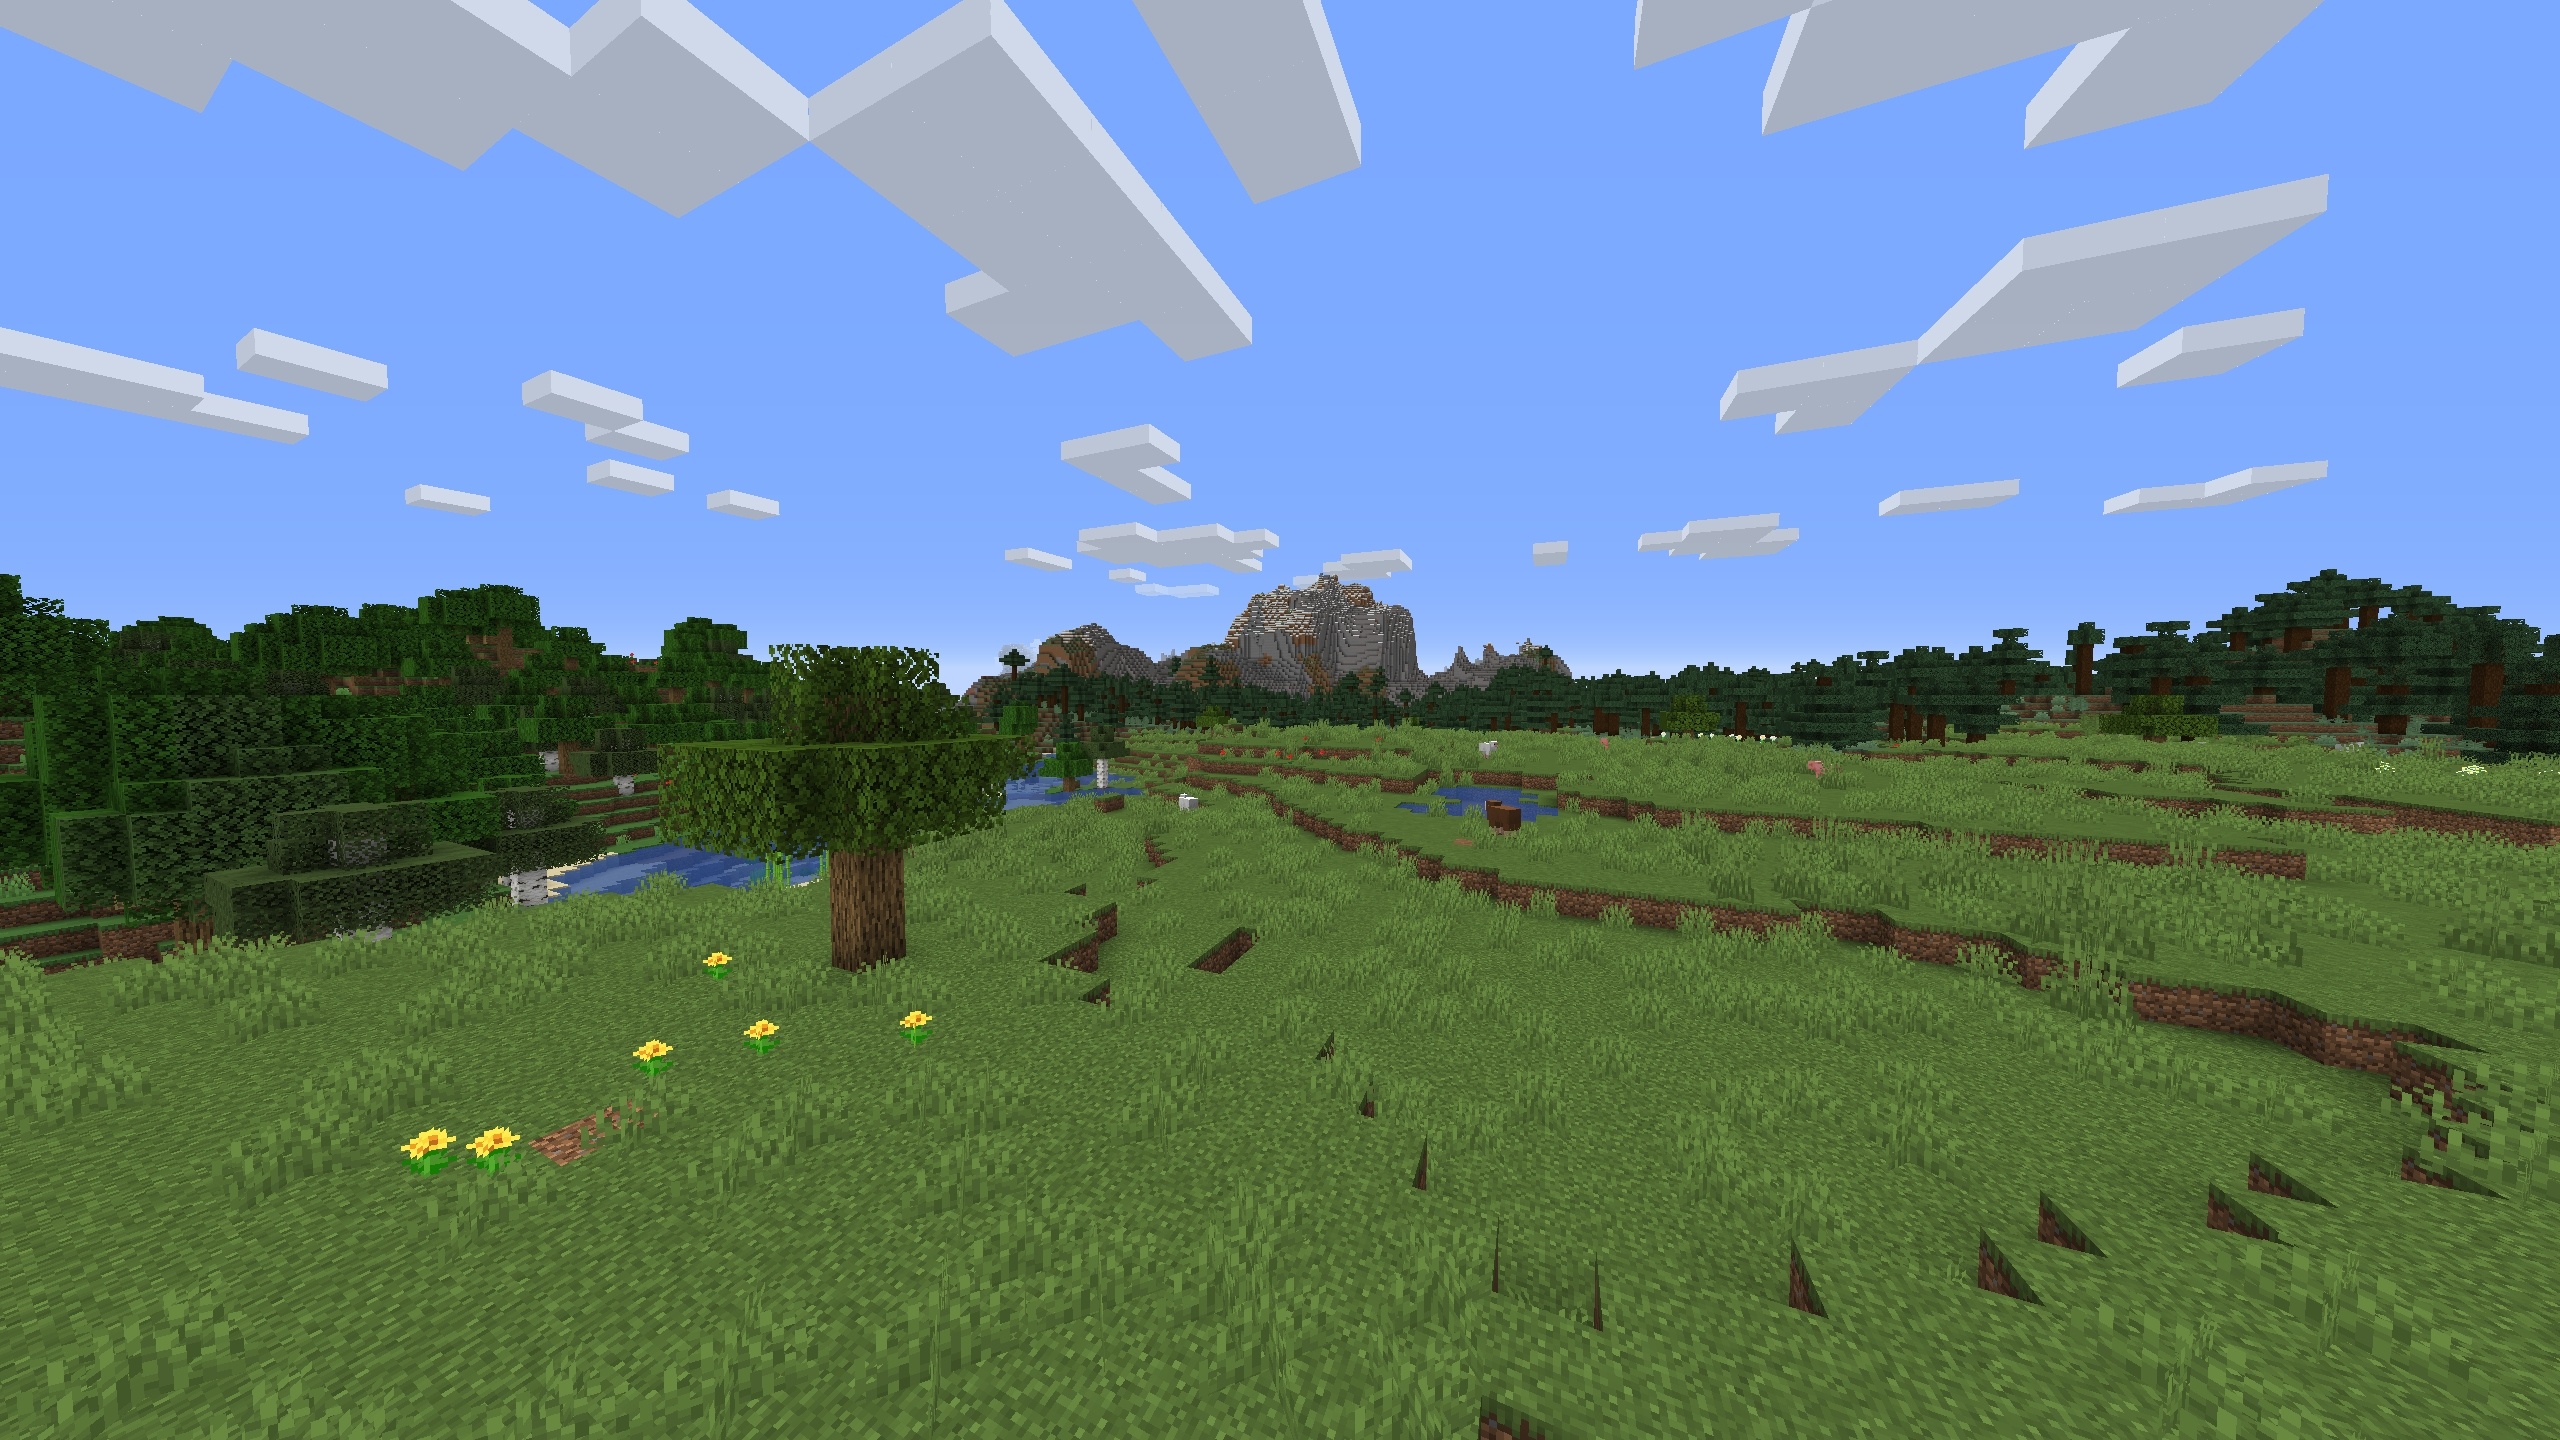 The 1.15.2 world with one oak tree in the middle of a plains with a mountain in the distance